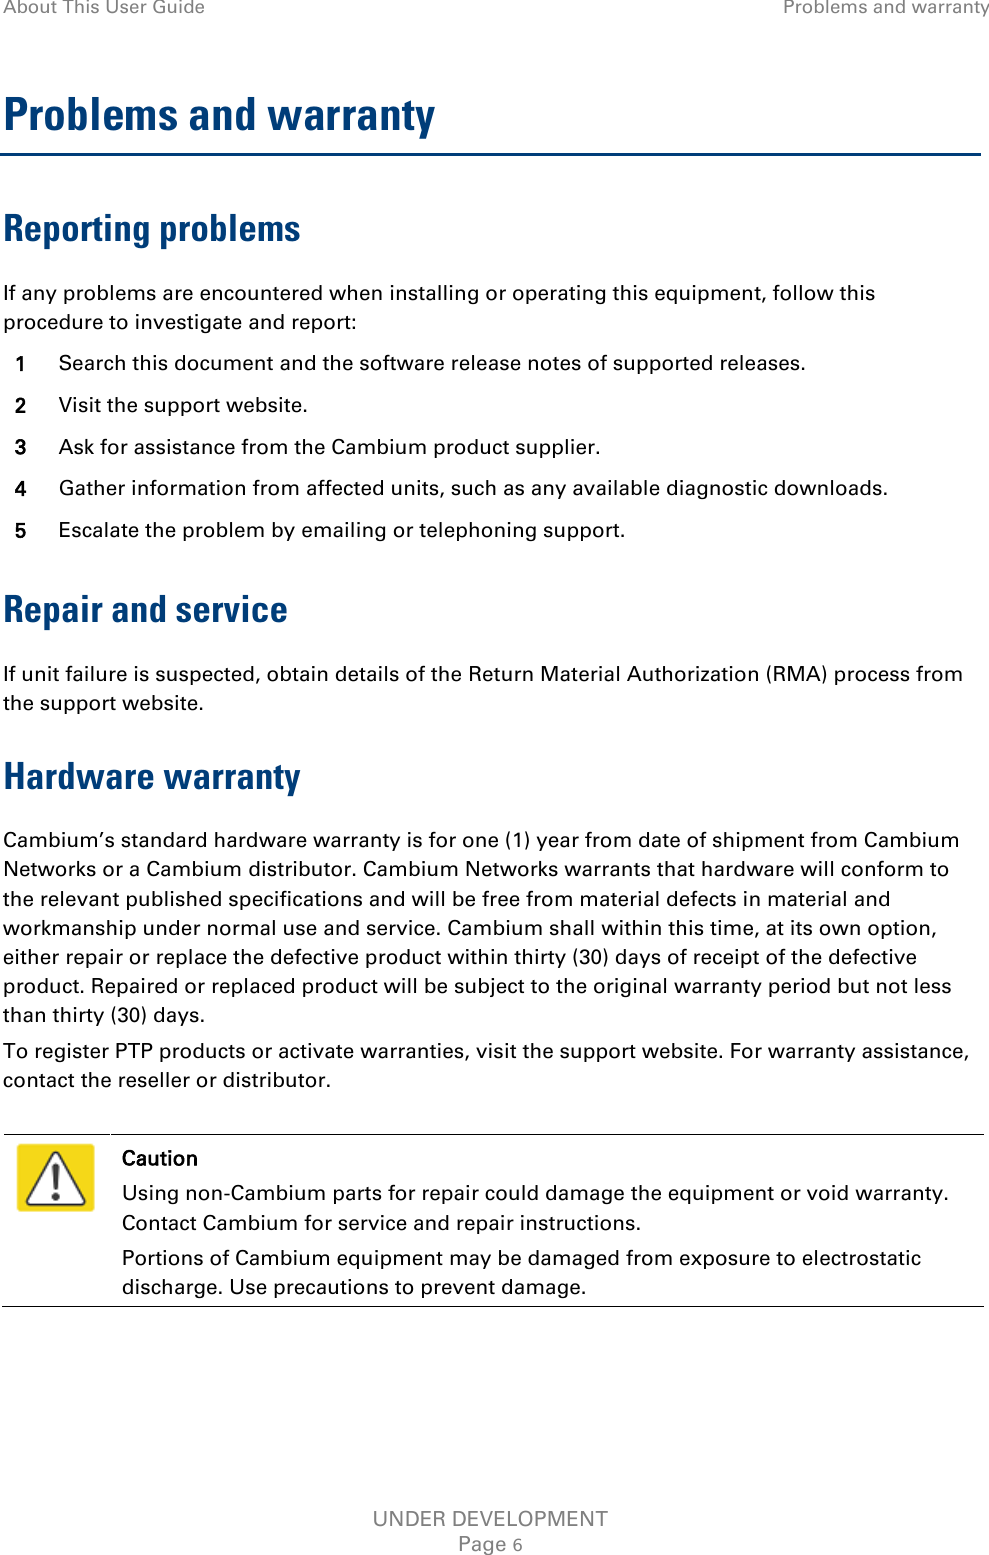 About This User Guide Problems and warranty  Problems and warranty Reporting problems If any problems are encountered when installing or operating this equipment, follow this procedure to investigate and report: 1 Search this document and the software release notes of supported releases. 2 Visit the support website. 3 Ask for assistance from the Cambium product supplier. 4 Gather information from affected units, such as any available diagnostic downloads. 5 Escalate the problem by emailing or telephoning support. Repair and service If unit failure is suspected, obtain details of the Return Material Authorization (RMA) process from the support website. Hardware warranty Cambium’s standard hardware warranty is for one (1) year from date of shipment from Cambium Networks or a Cambium distributor. Cambium Networks warrants that hardware will conform to the relevant published specifications and will be free from material defects in material and workmanship under normal use and service. Cambium shall within this time, at its own option, either repair or replace the defective product within thirty (30) days of receipt of the defective product. Repaired or replaced product will be subject to the original warranty period but not less than thirty (30) days. To register PTP products or activate warranties, visit the support website. For warranty assistance, contact the reseller or distributor.   Caution Using non-Cambium parts for repair could damage the equipment or void warranty. Contact Cambium for service and repair instructions. Portions of Cambium equipment may be damaged from exposure to electrostatic discharge. Use precautions to prevent damage.  UNDER DEVELOPMENT Page 6 